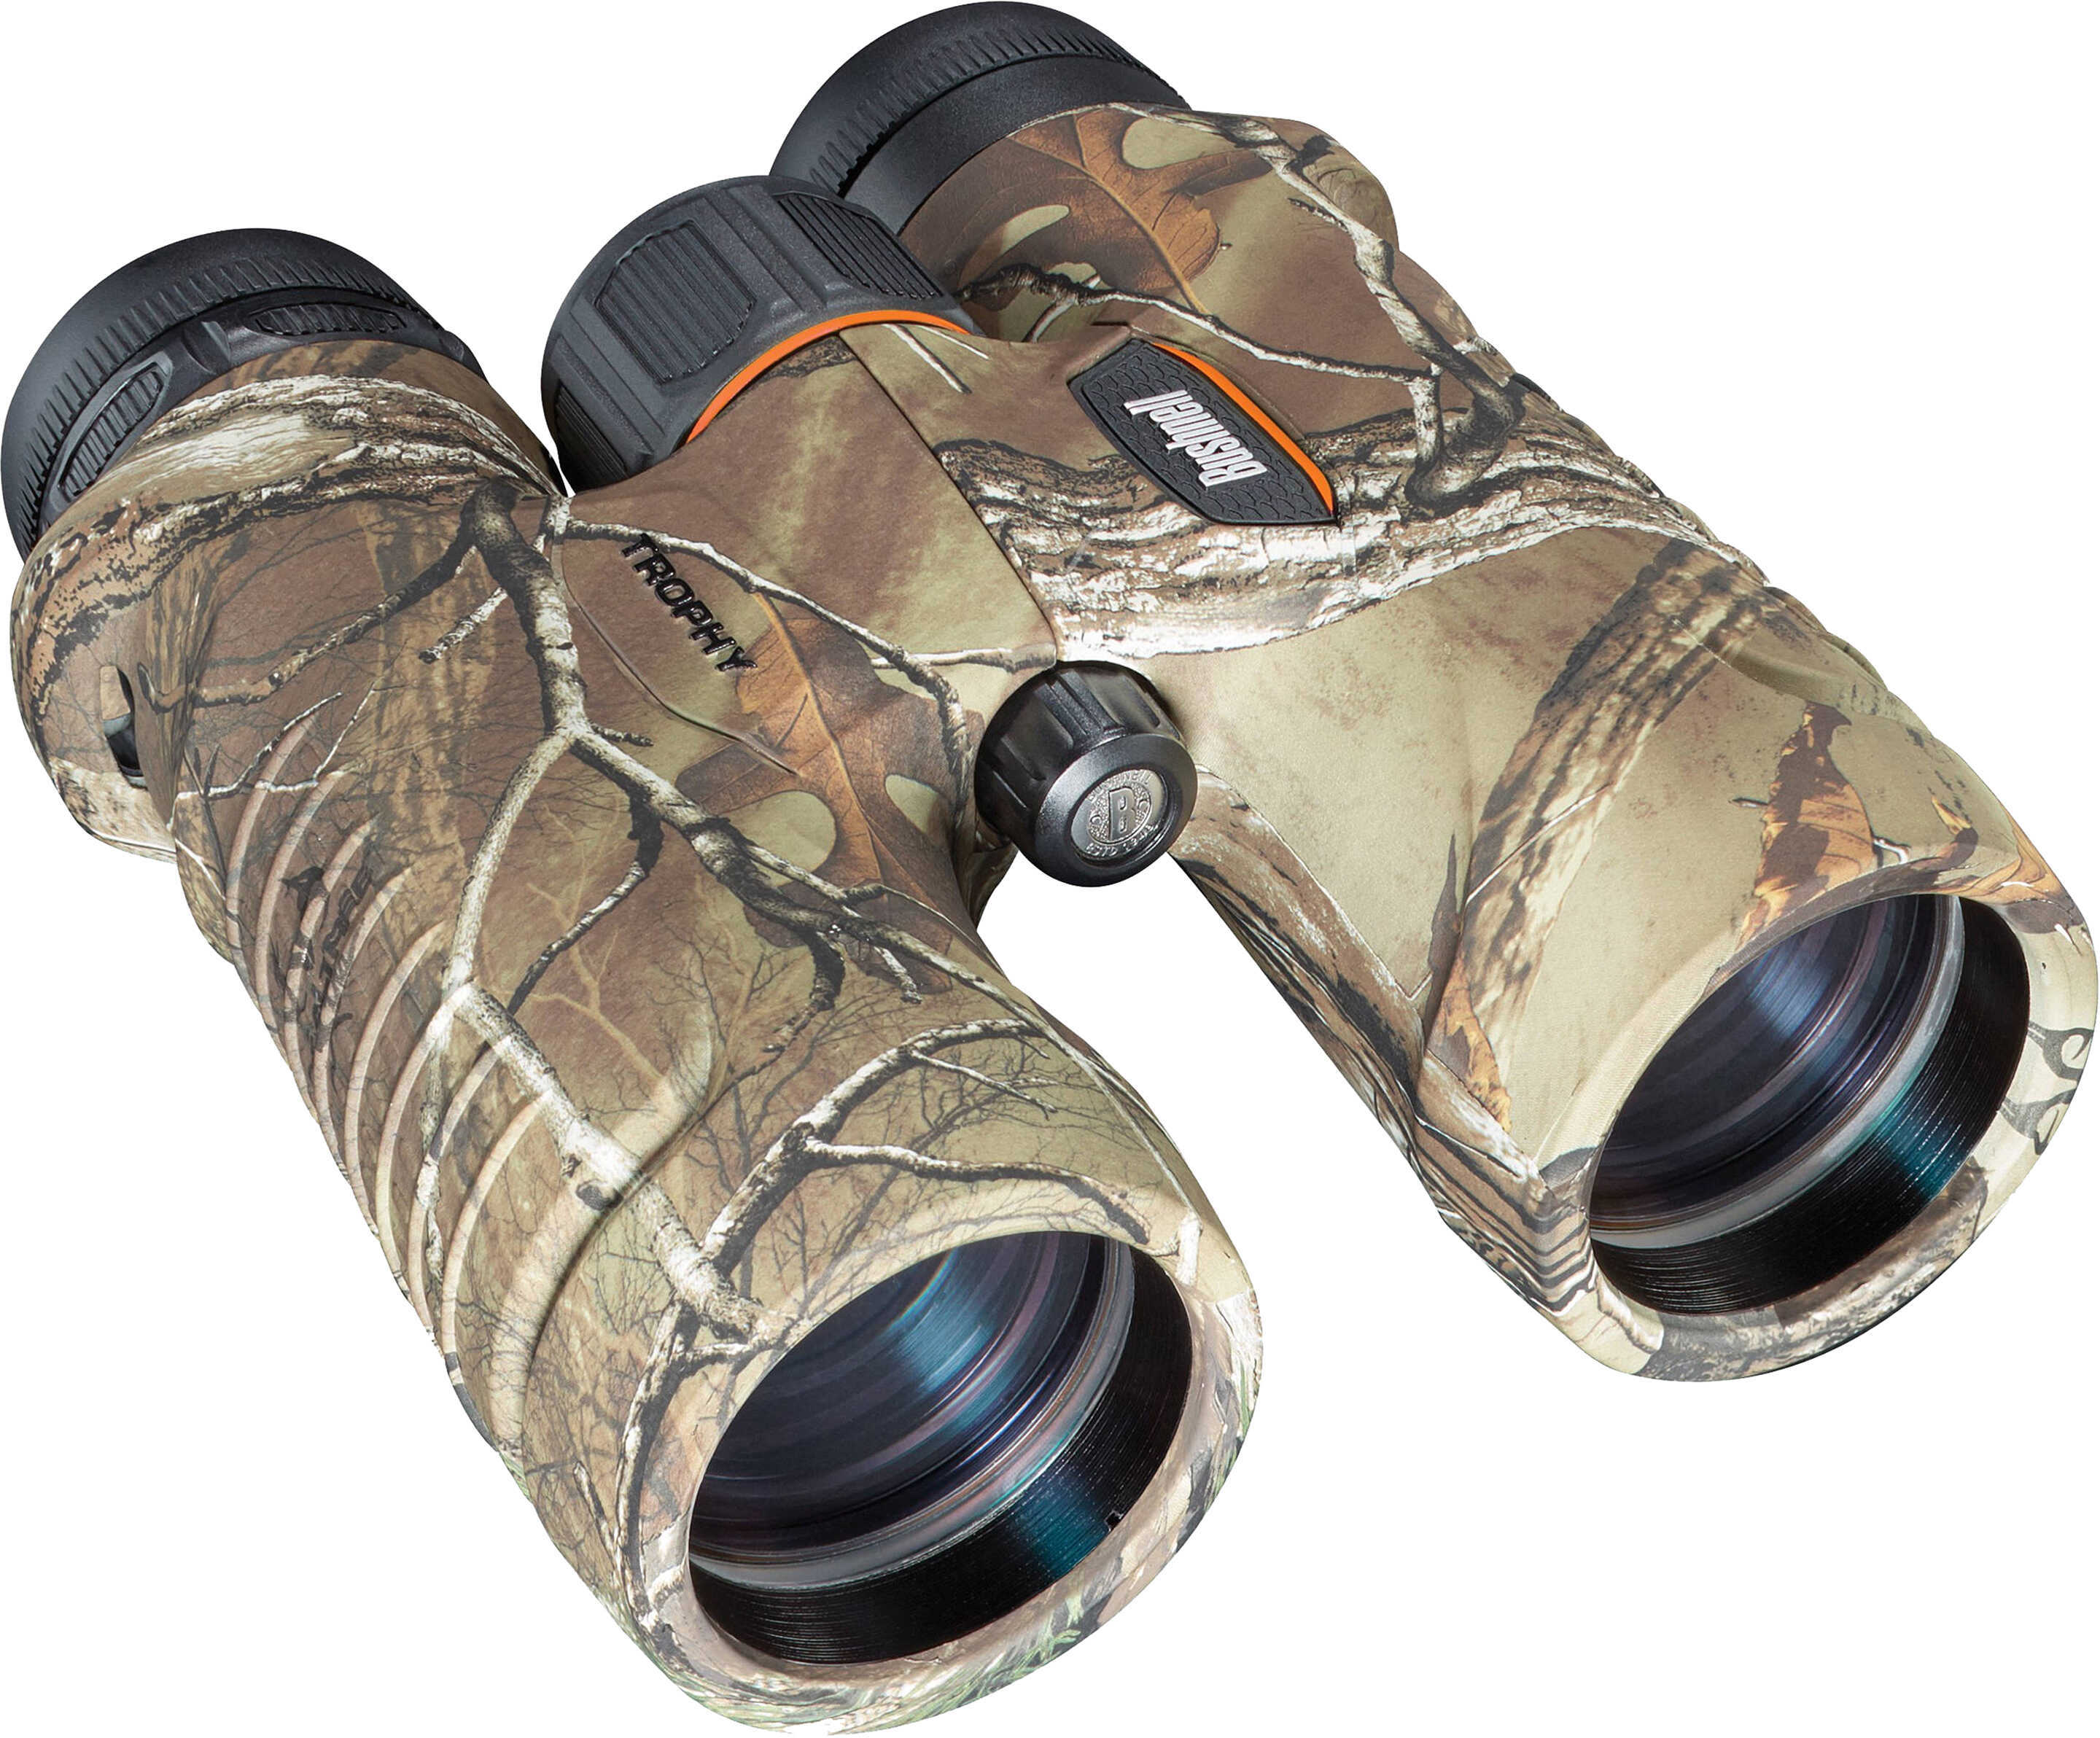 Bushnell Trophy Binoculars 10X42mm, Realtree Xtra, Roof Prism Md: 334211